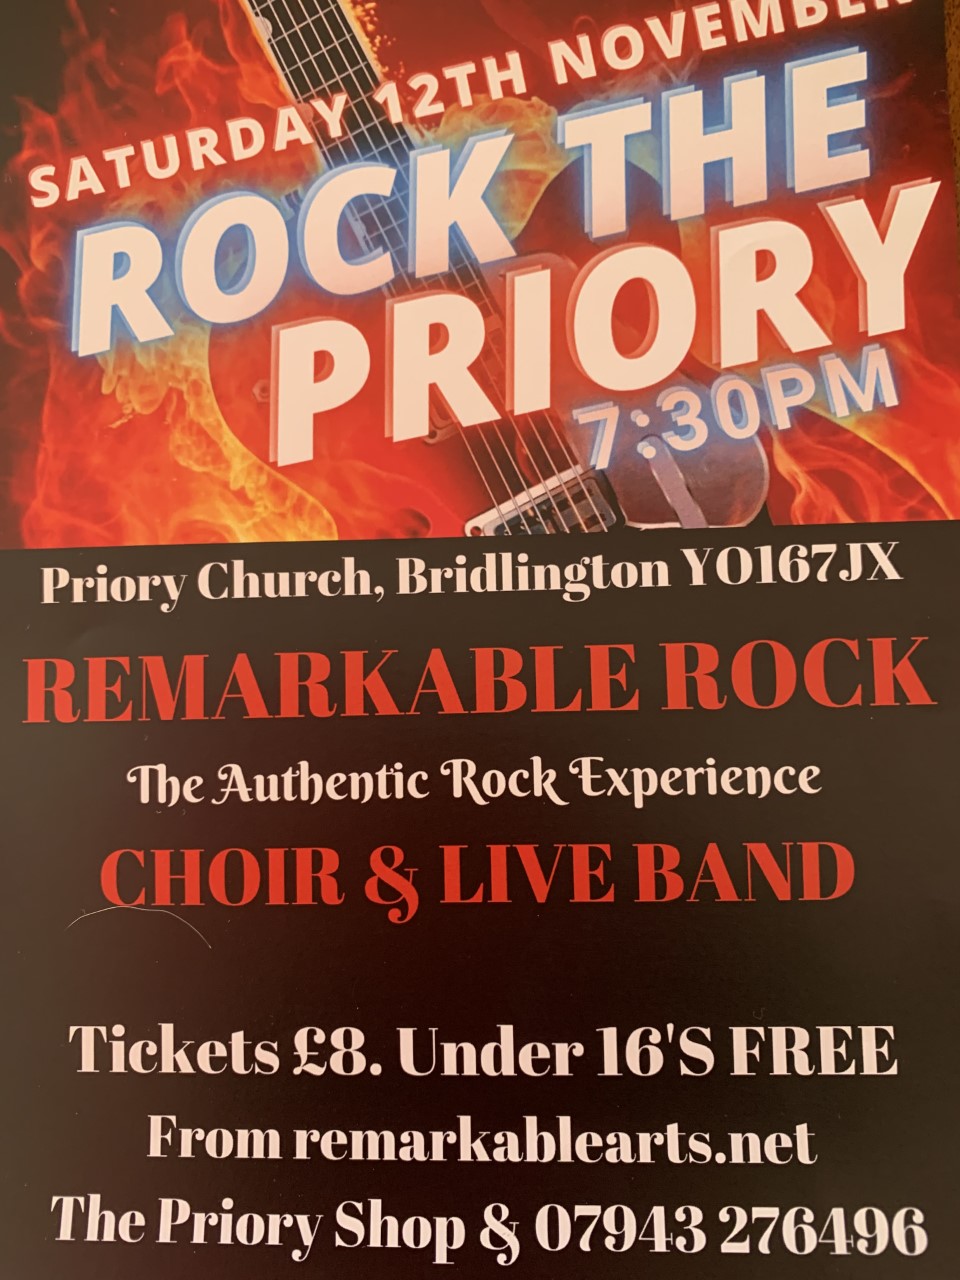 Event Poster - Rock the Priory November 2022